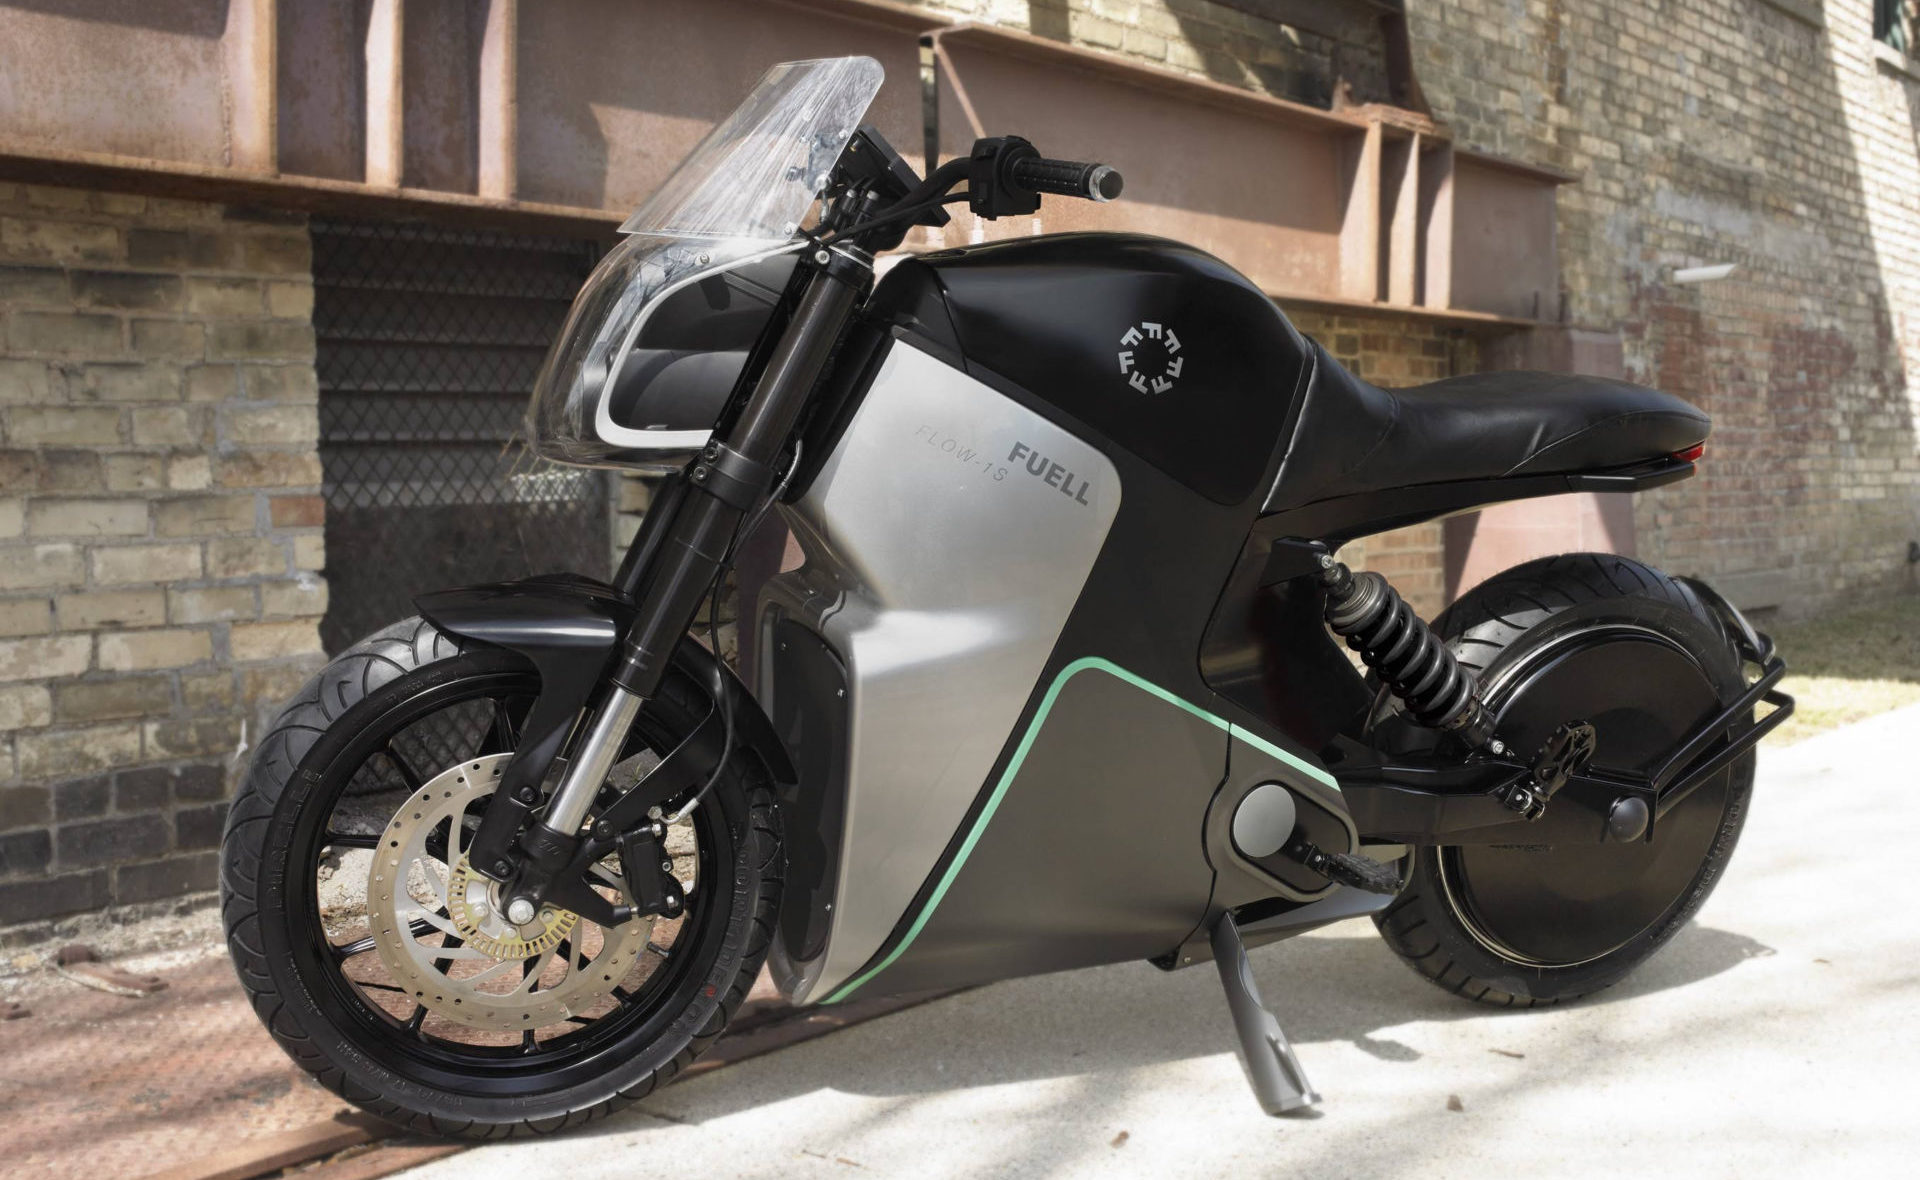 A FUELL Flow electric motorcycle. Photo courtesy FUELL.